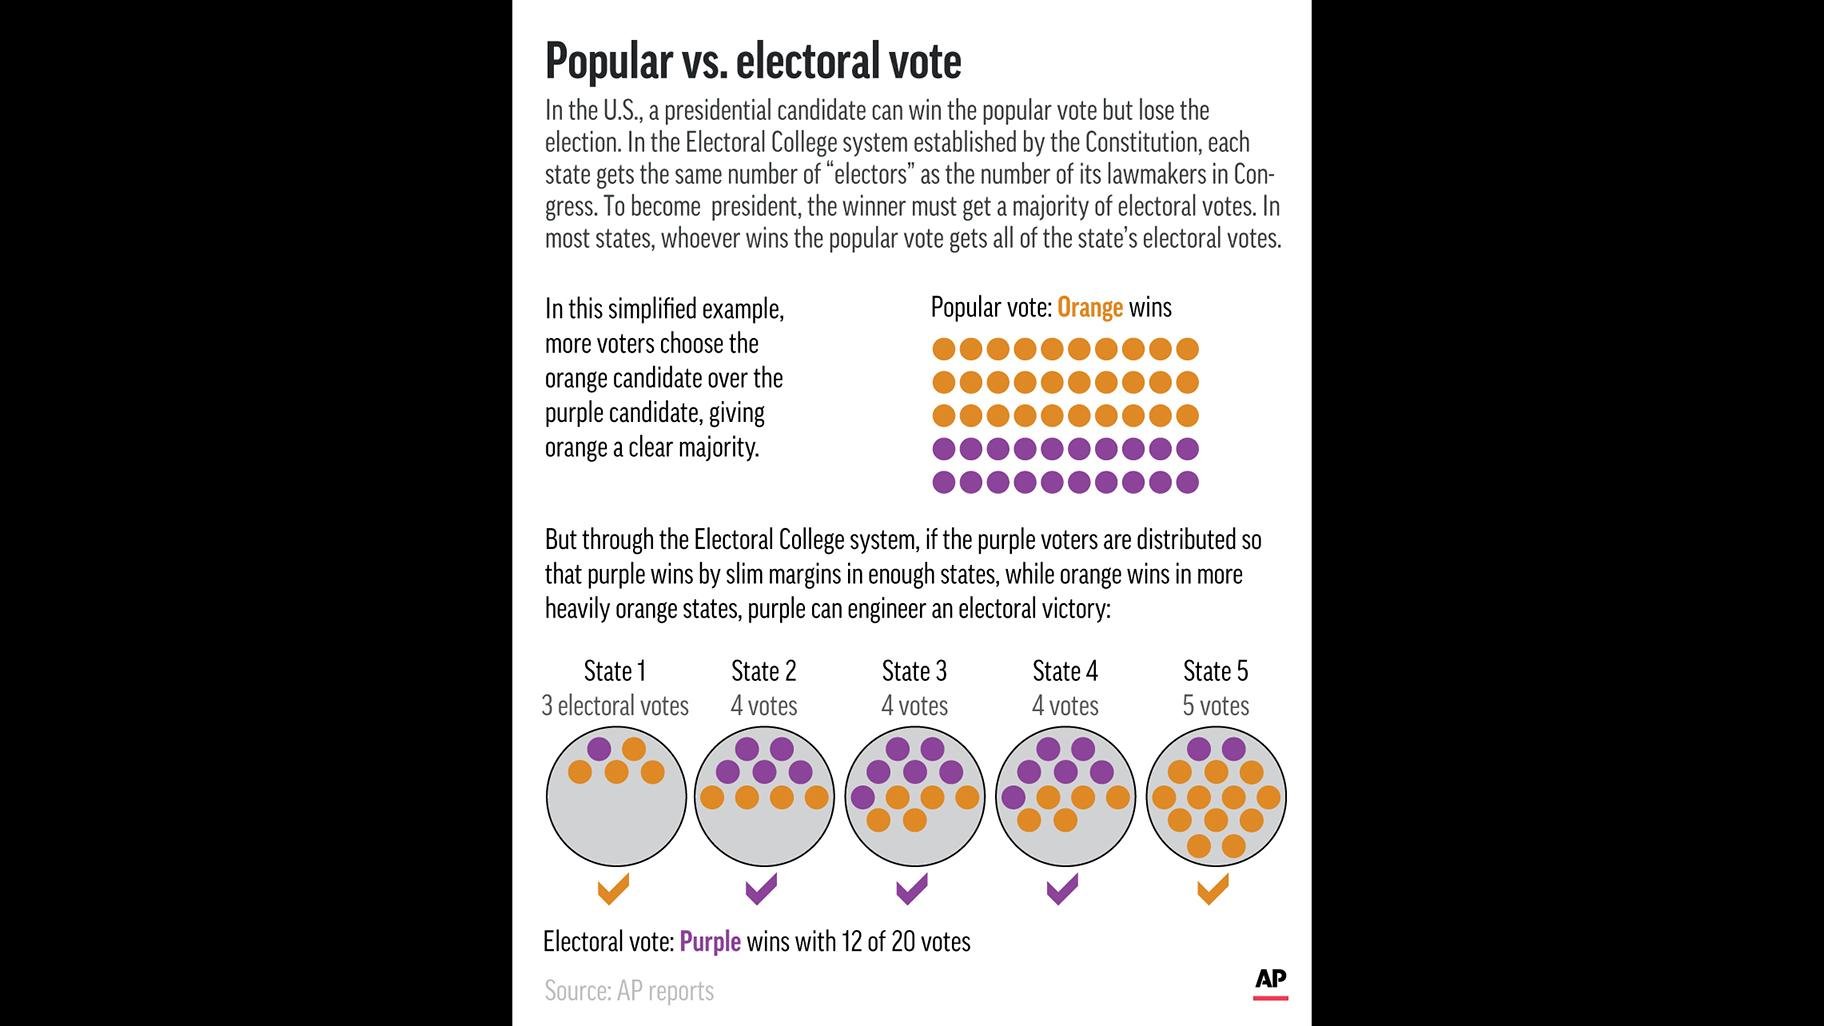 Graphic shows scenario in which a presidential candidate can win the popular vote but lose the election. (Click to enlarge.)